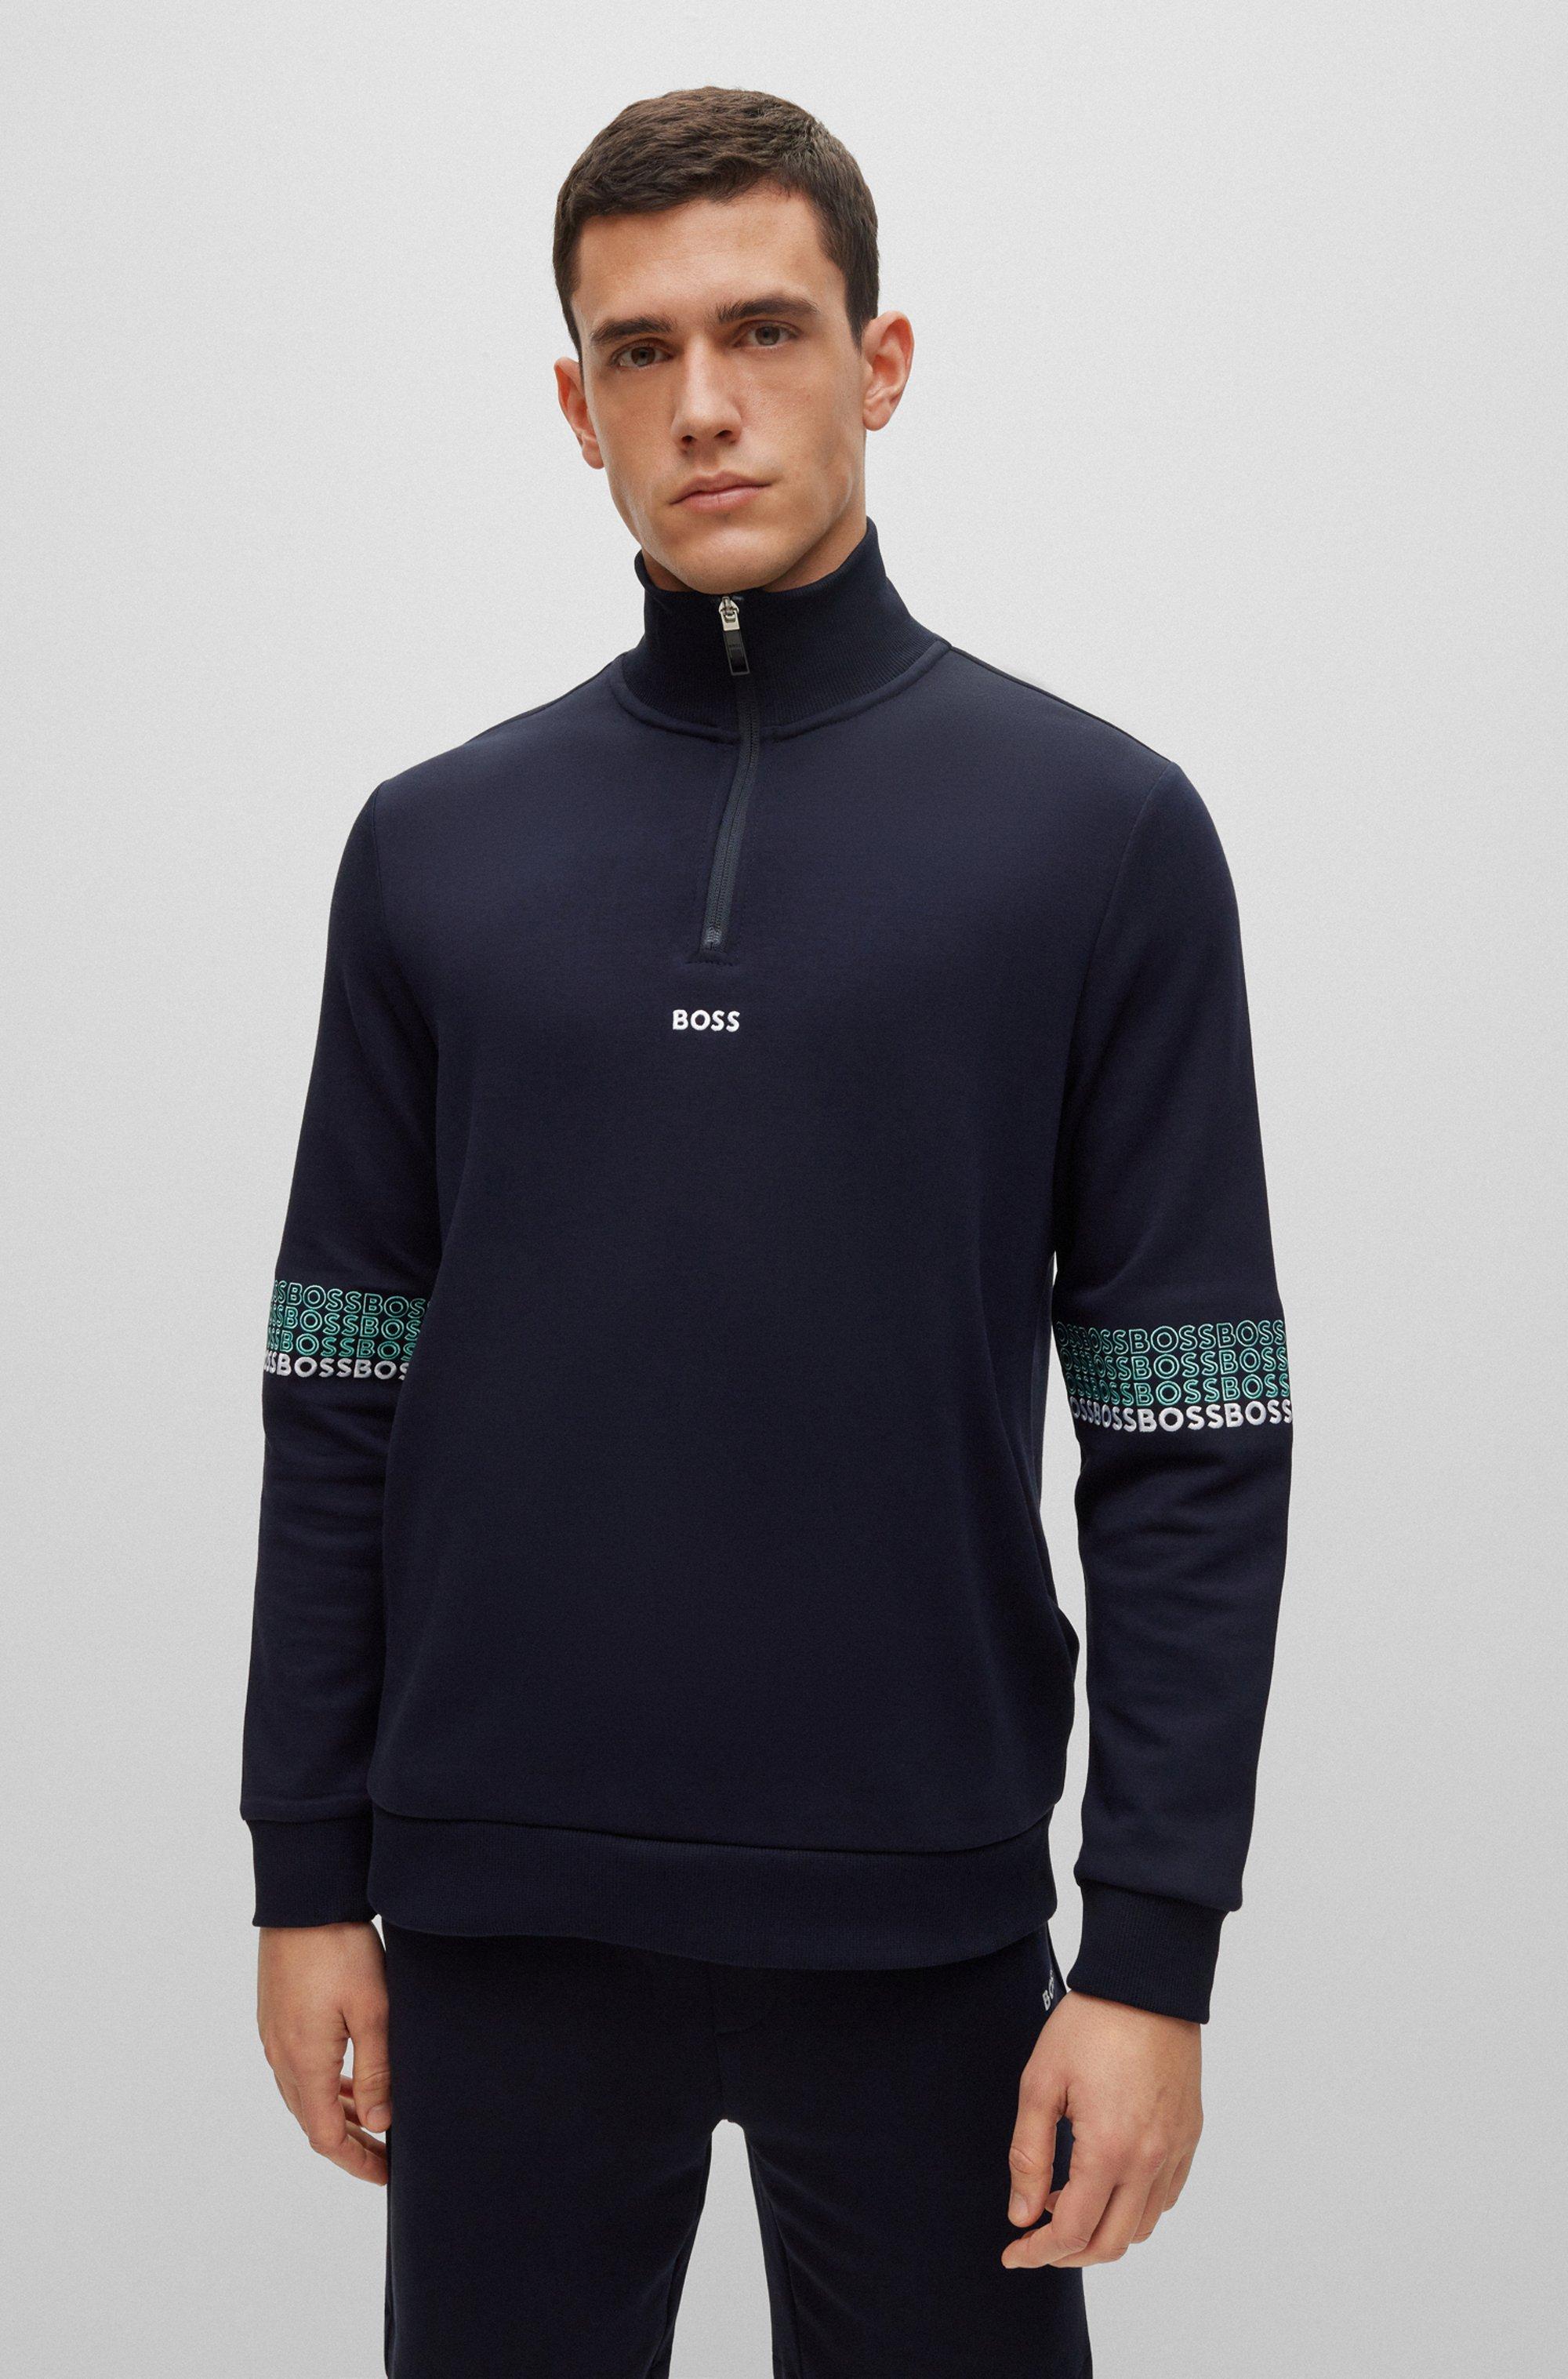 BOSS by HUGO BOSS Cotton-blend Zip-neck Sweatshirt With Multi-colored ...